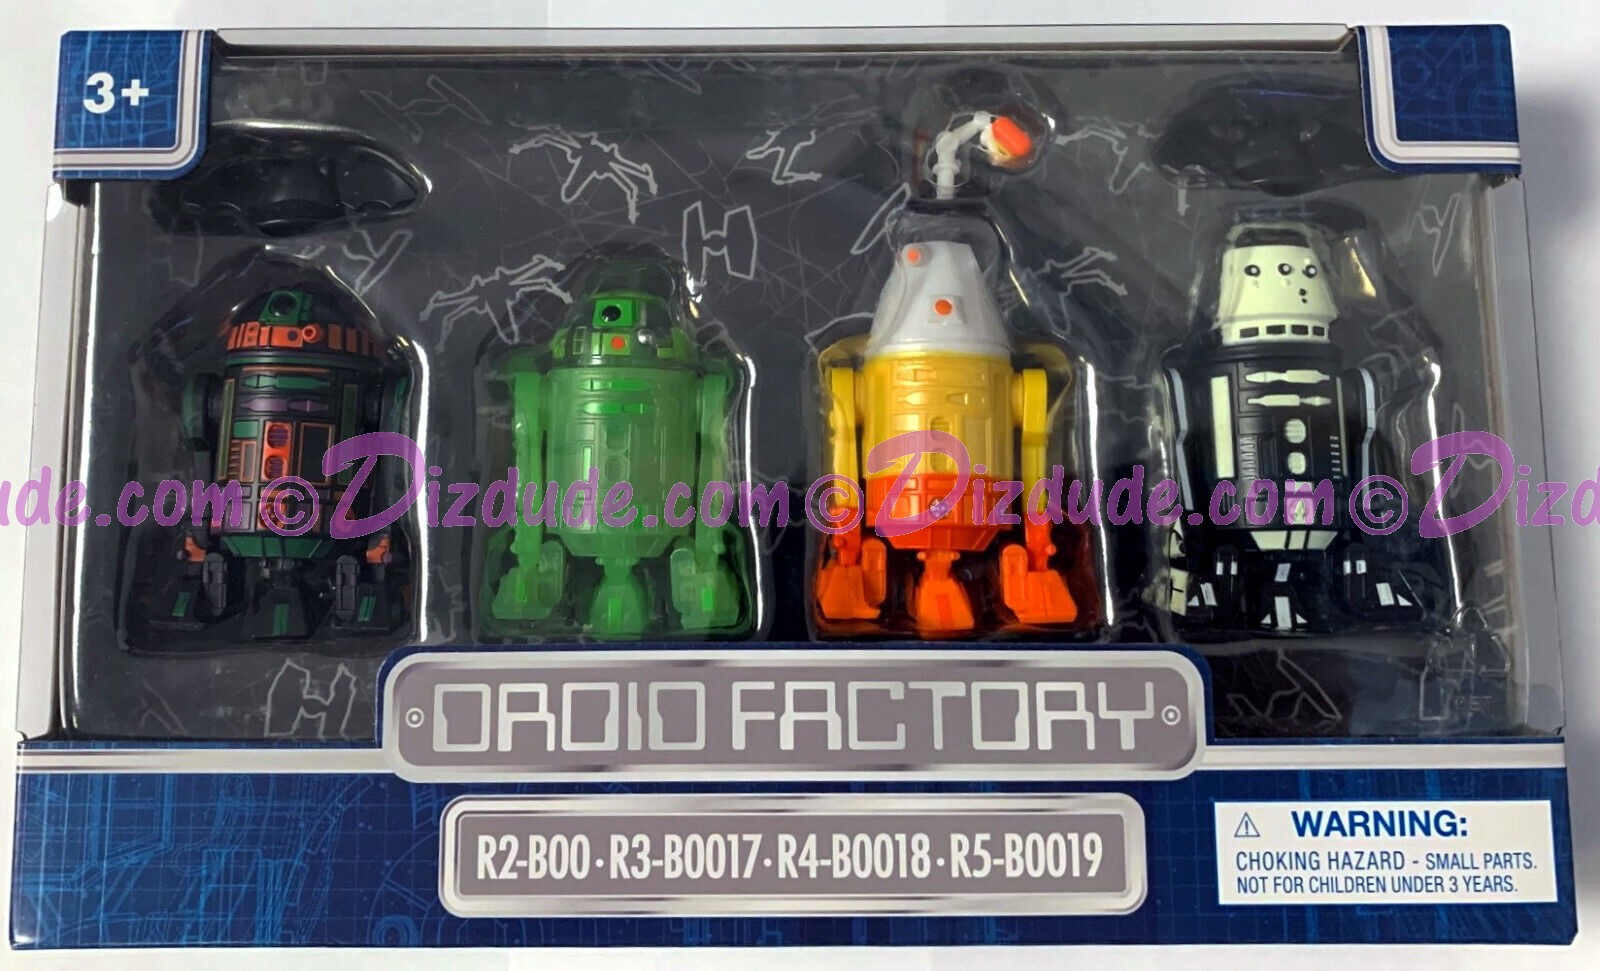 Star Wars Disney Parks 2022 Halloween Droid Factory 4 Droid set - Disney World Astromech DROID FACTORY Action Figures 3¾ Inch 4 Droid Multi-Pack with R2-BOO • R3-BOO17 • R4-BOO18 • R5-BOO19 © Dizdude.com